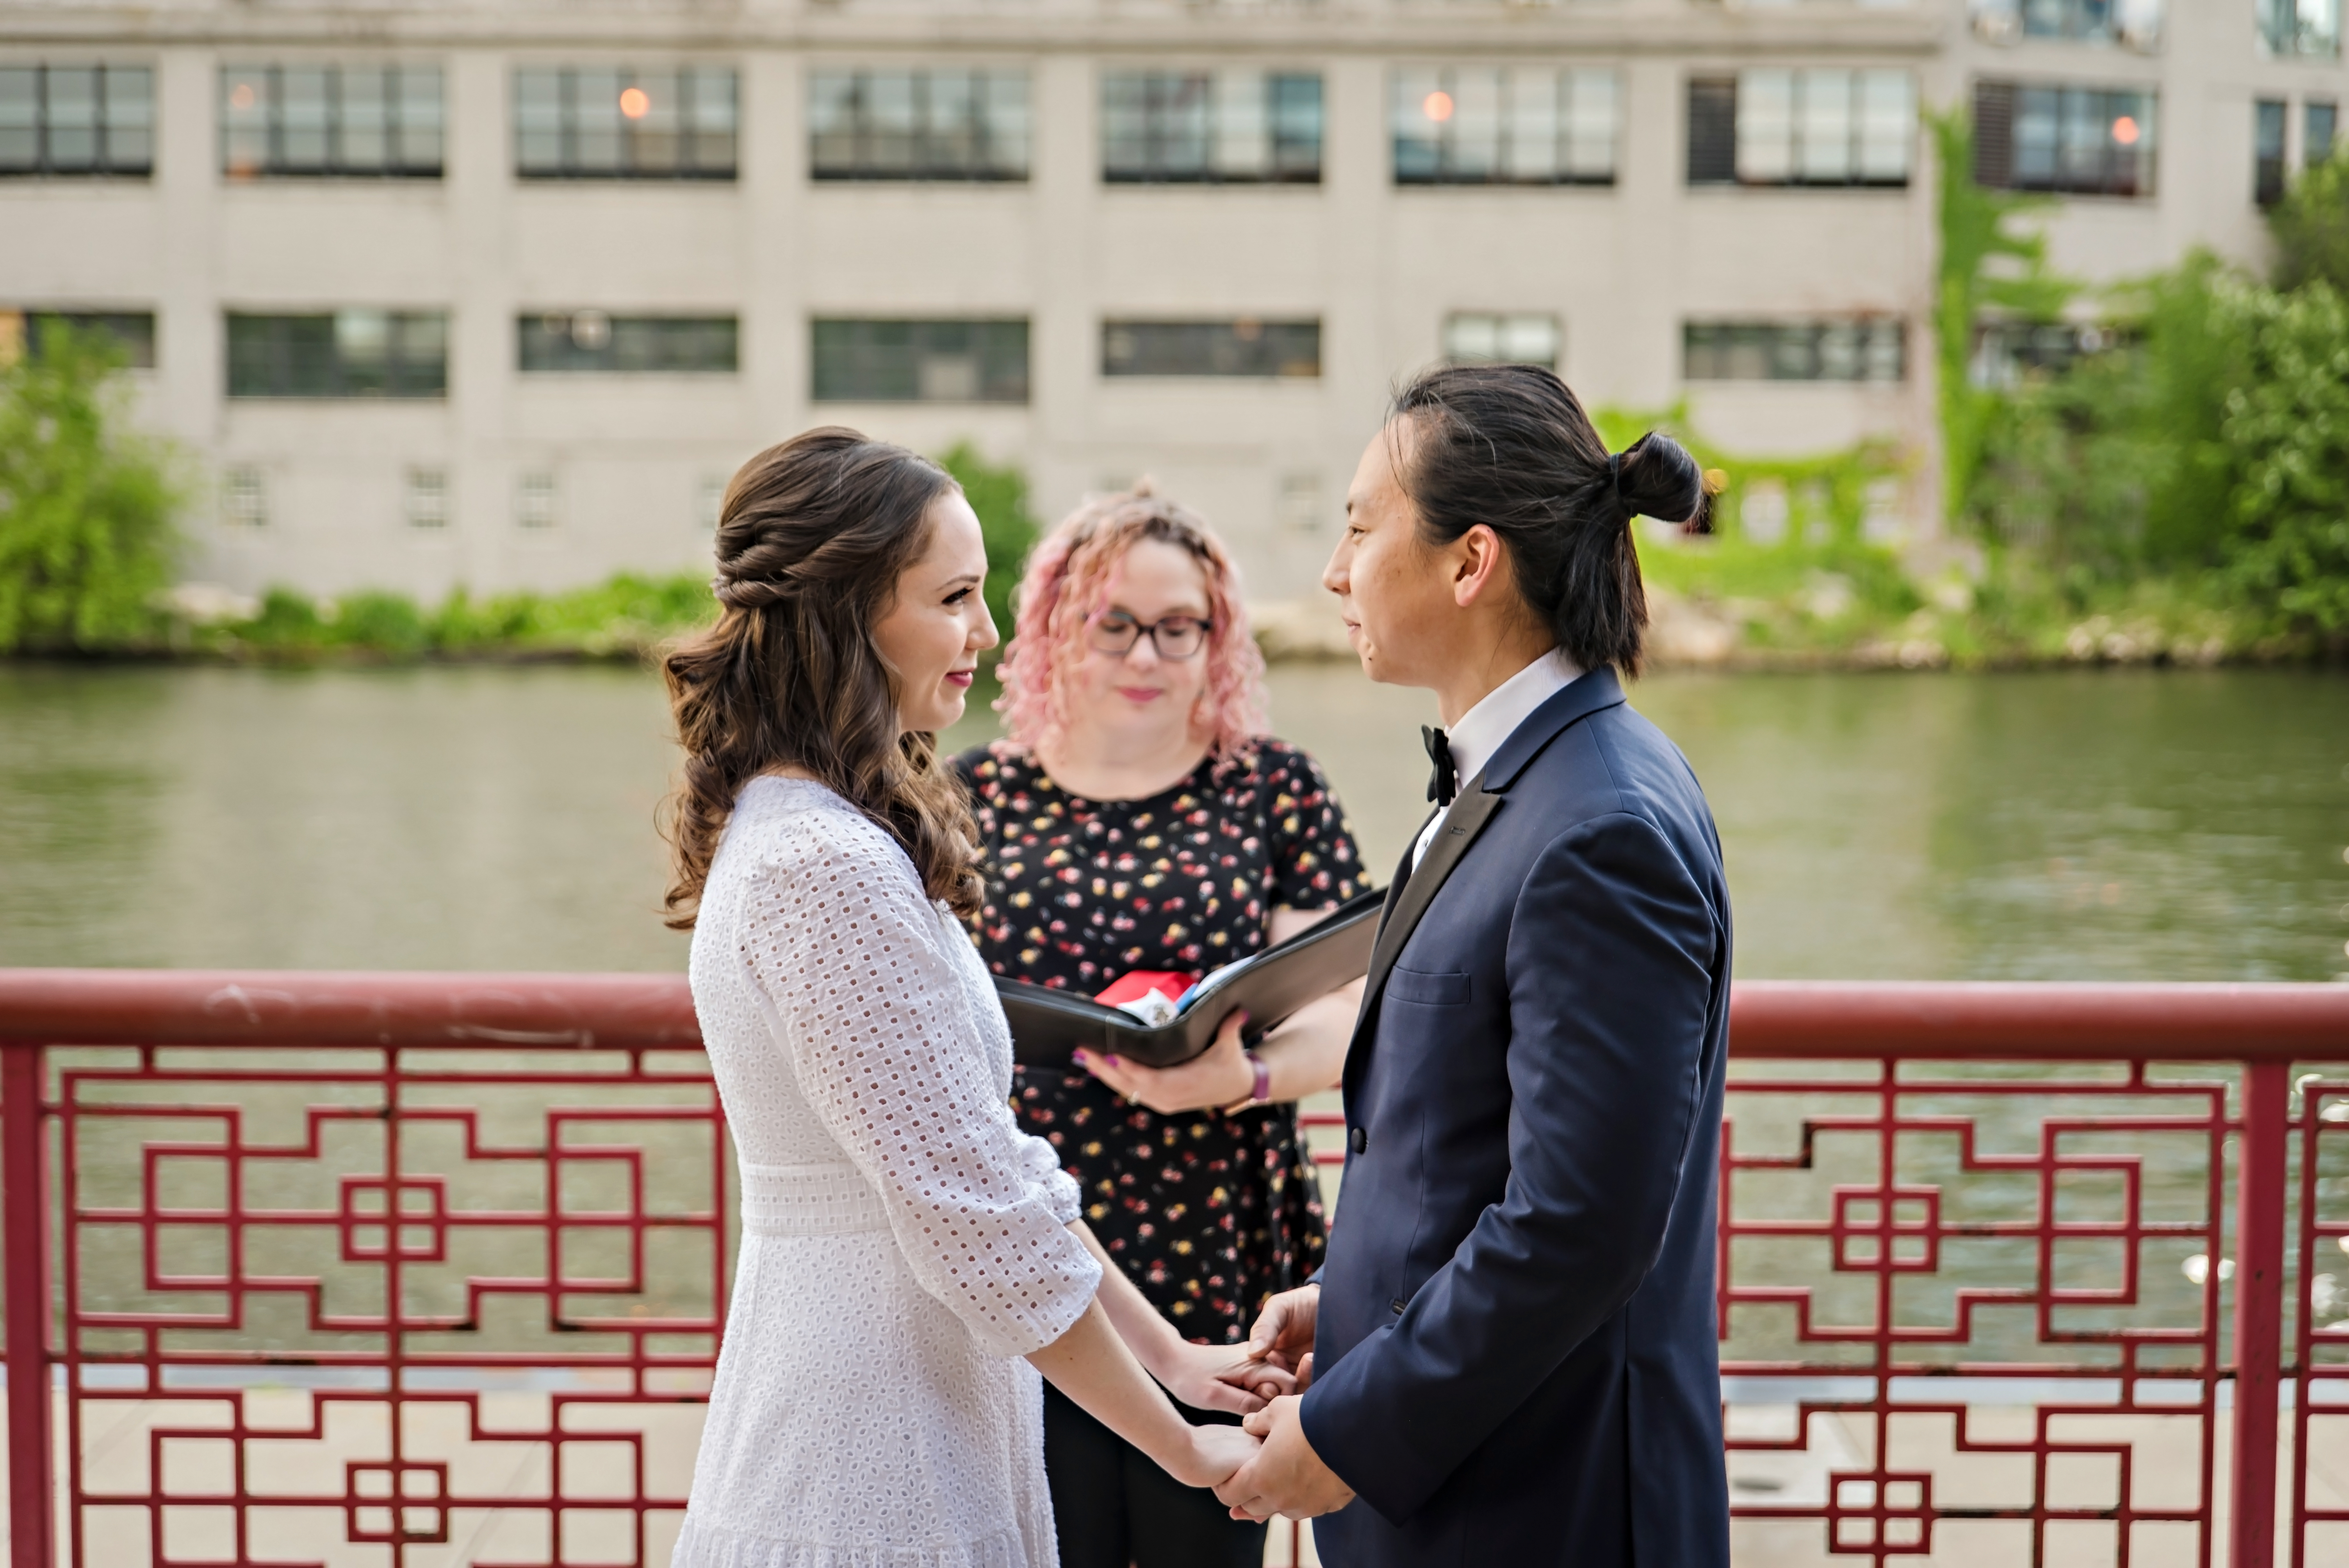 Ping Tom Park Elopement officiant